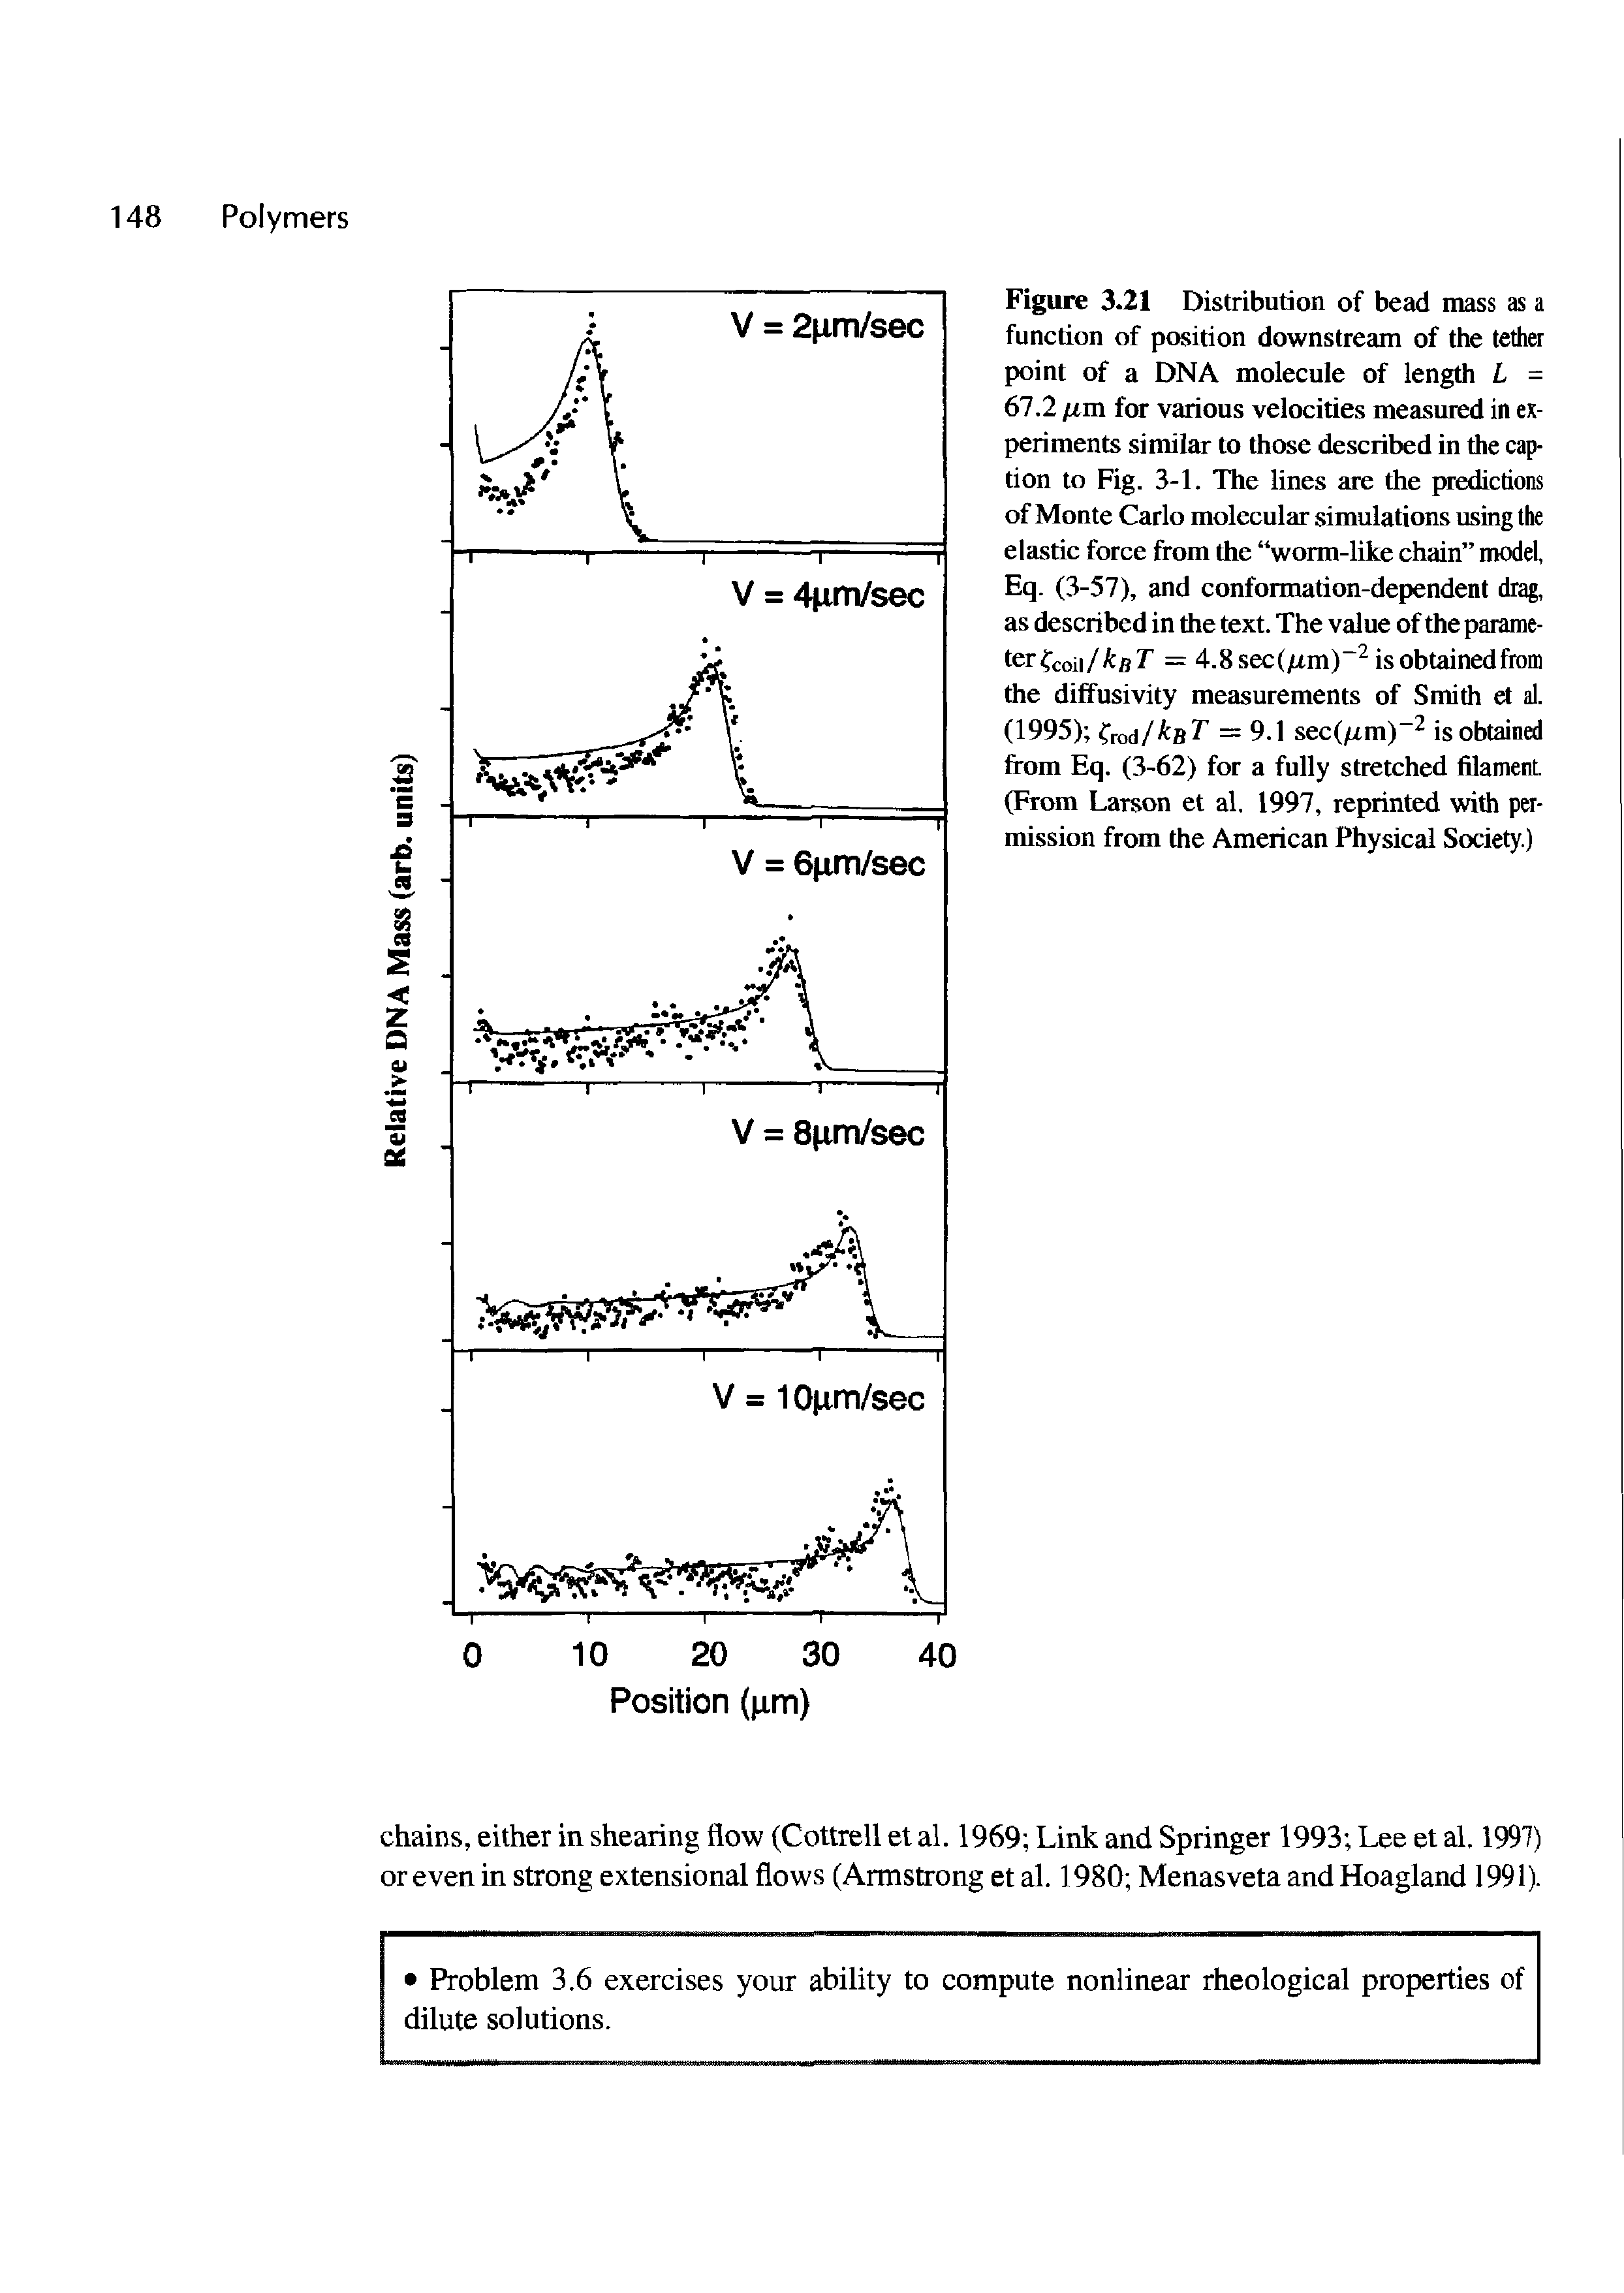 Figure 3-21 Distribution of bead mass as a function of position downstream of the tether point of a DNA molecule of length L -67.2 tm for various velocities measured in experiments similar to those described in the caption to Fig. 3-1. The lines are the predictions of Monte Carlo molecular simulations using the elastic force from the worm-like chain model, Eq. (3-57), and conformation-dependent drag, as described in the text. The value of the parameter fcoii/ ksT — 4.8 sec(/im) is obtained from the diffusivity measurements of Smith et al. (1995) Crod/ a = 9.1 sec(/Ltm) 2 is obtained from Eq. (3-62) for a fully stretched filament (From Larson et al. 1997, reprinted with permission from the American Physical Society.)...